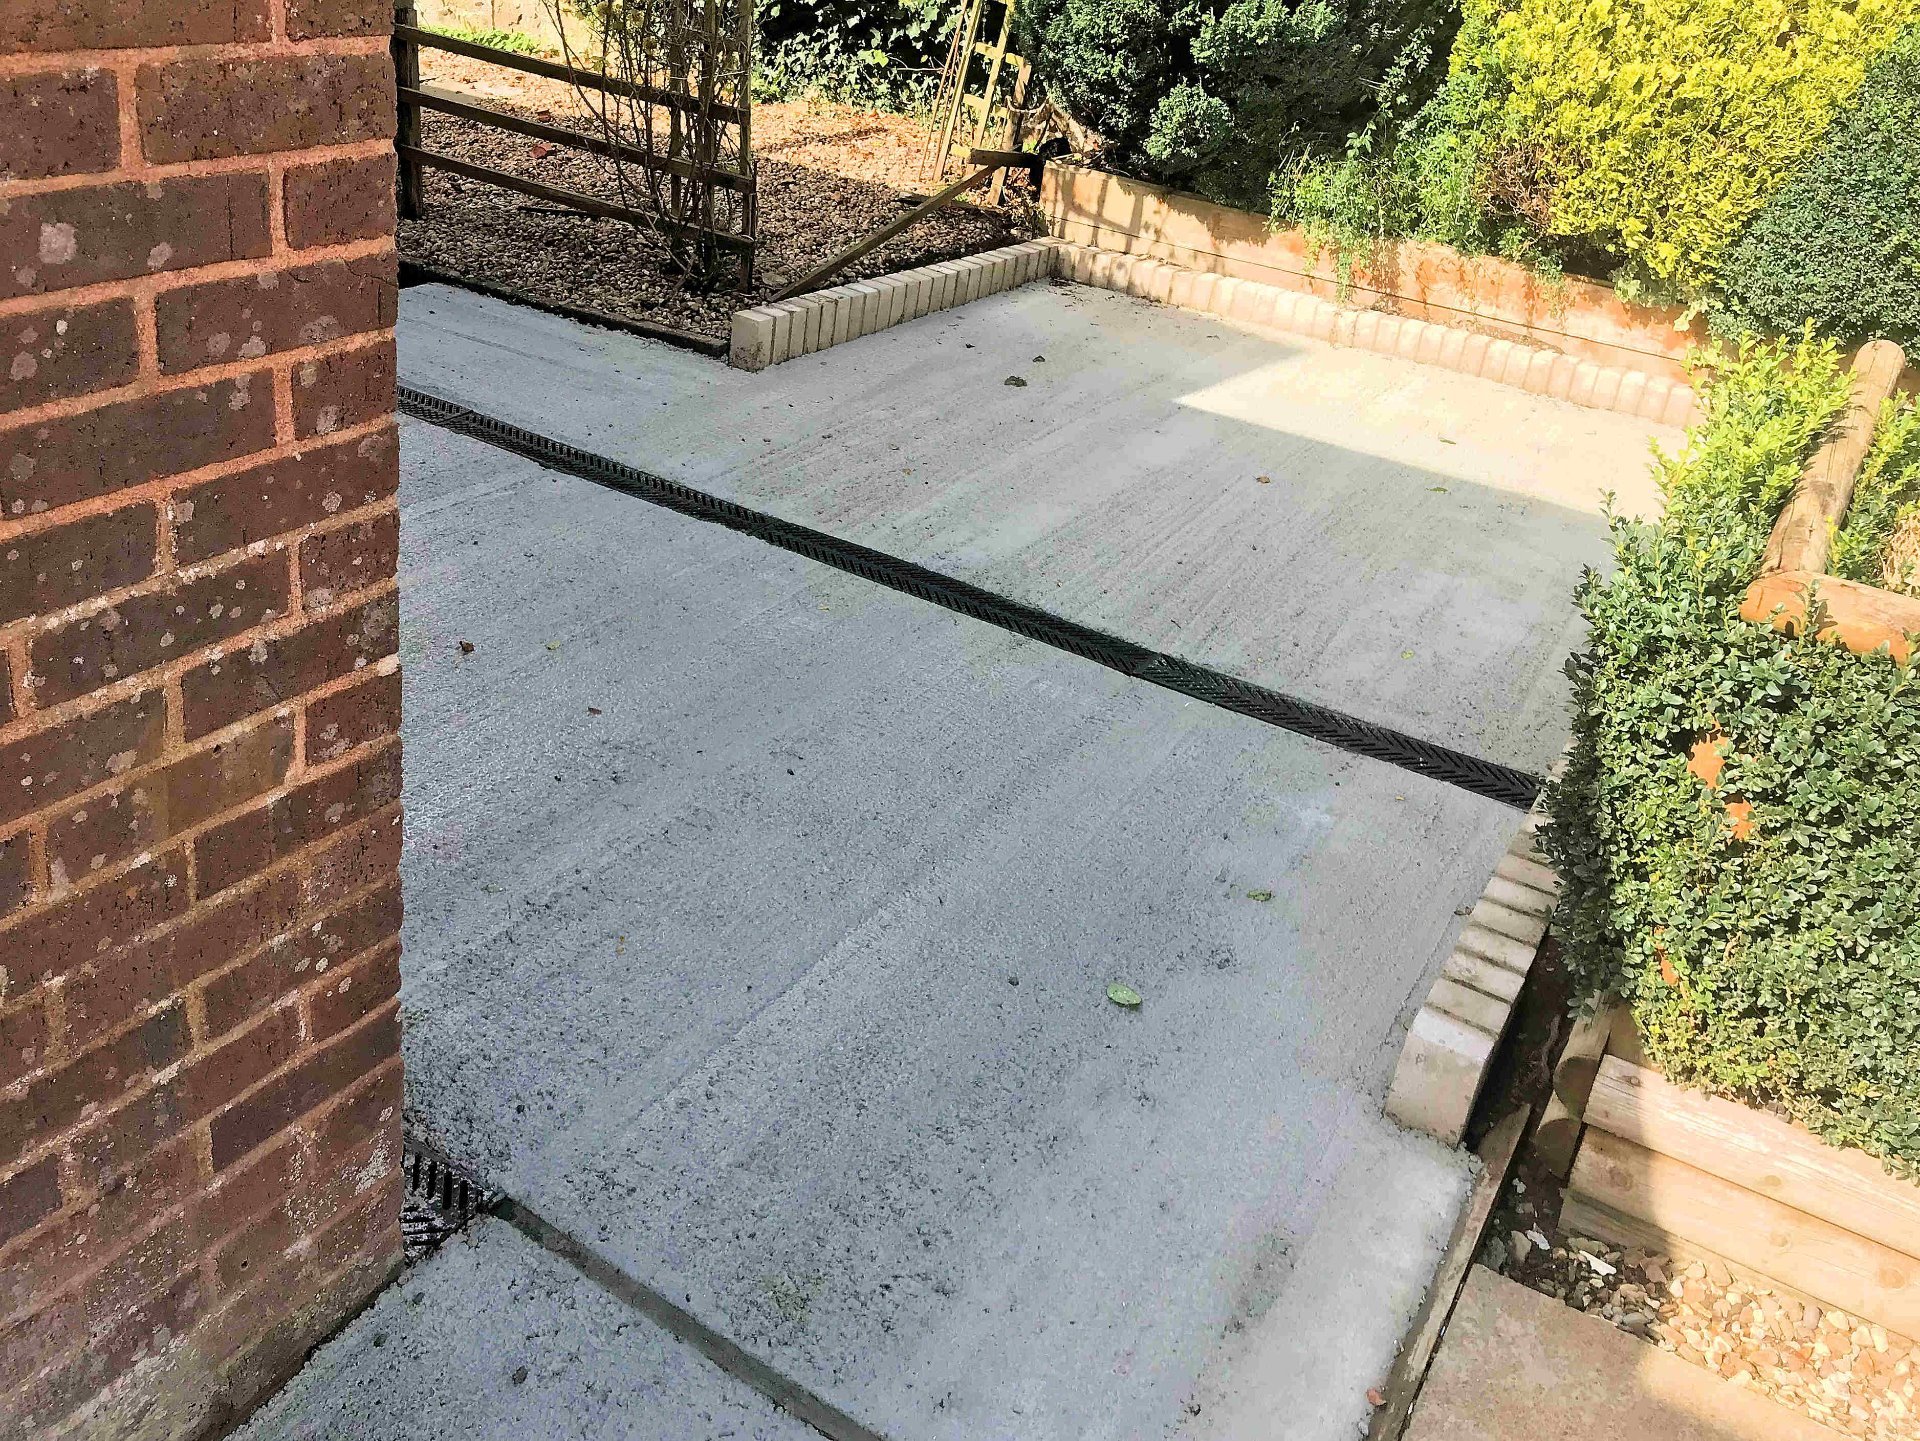 New concrete level hard standing completed to enable access to the garden for wheelchair users. North Devon